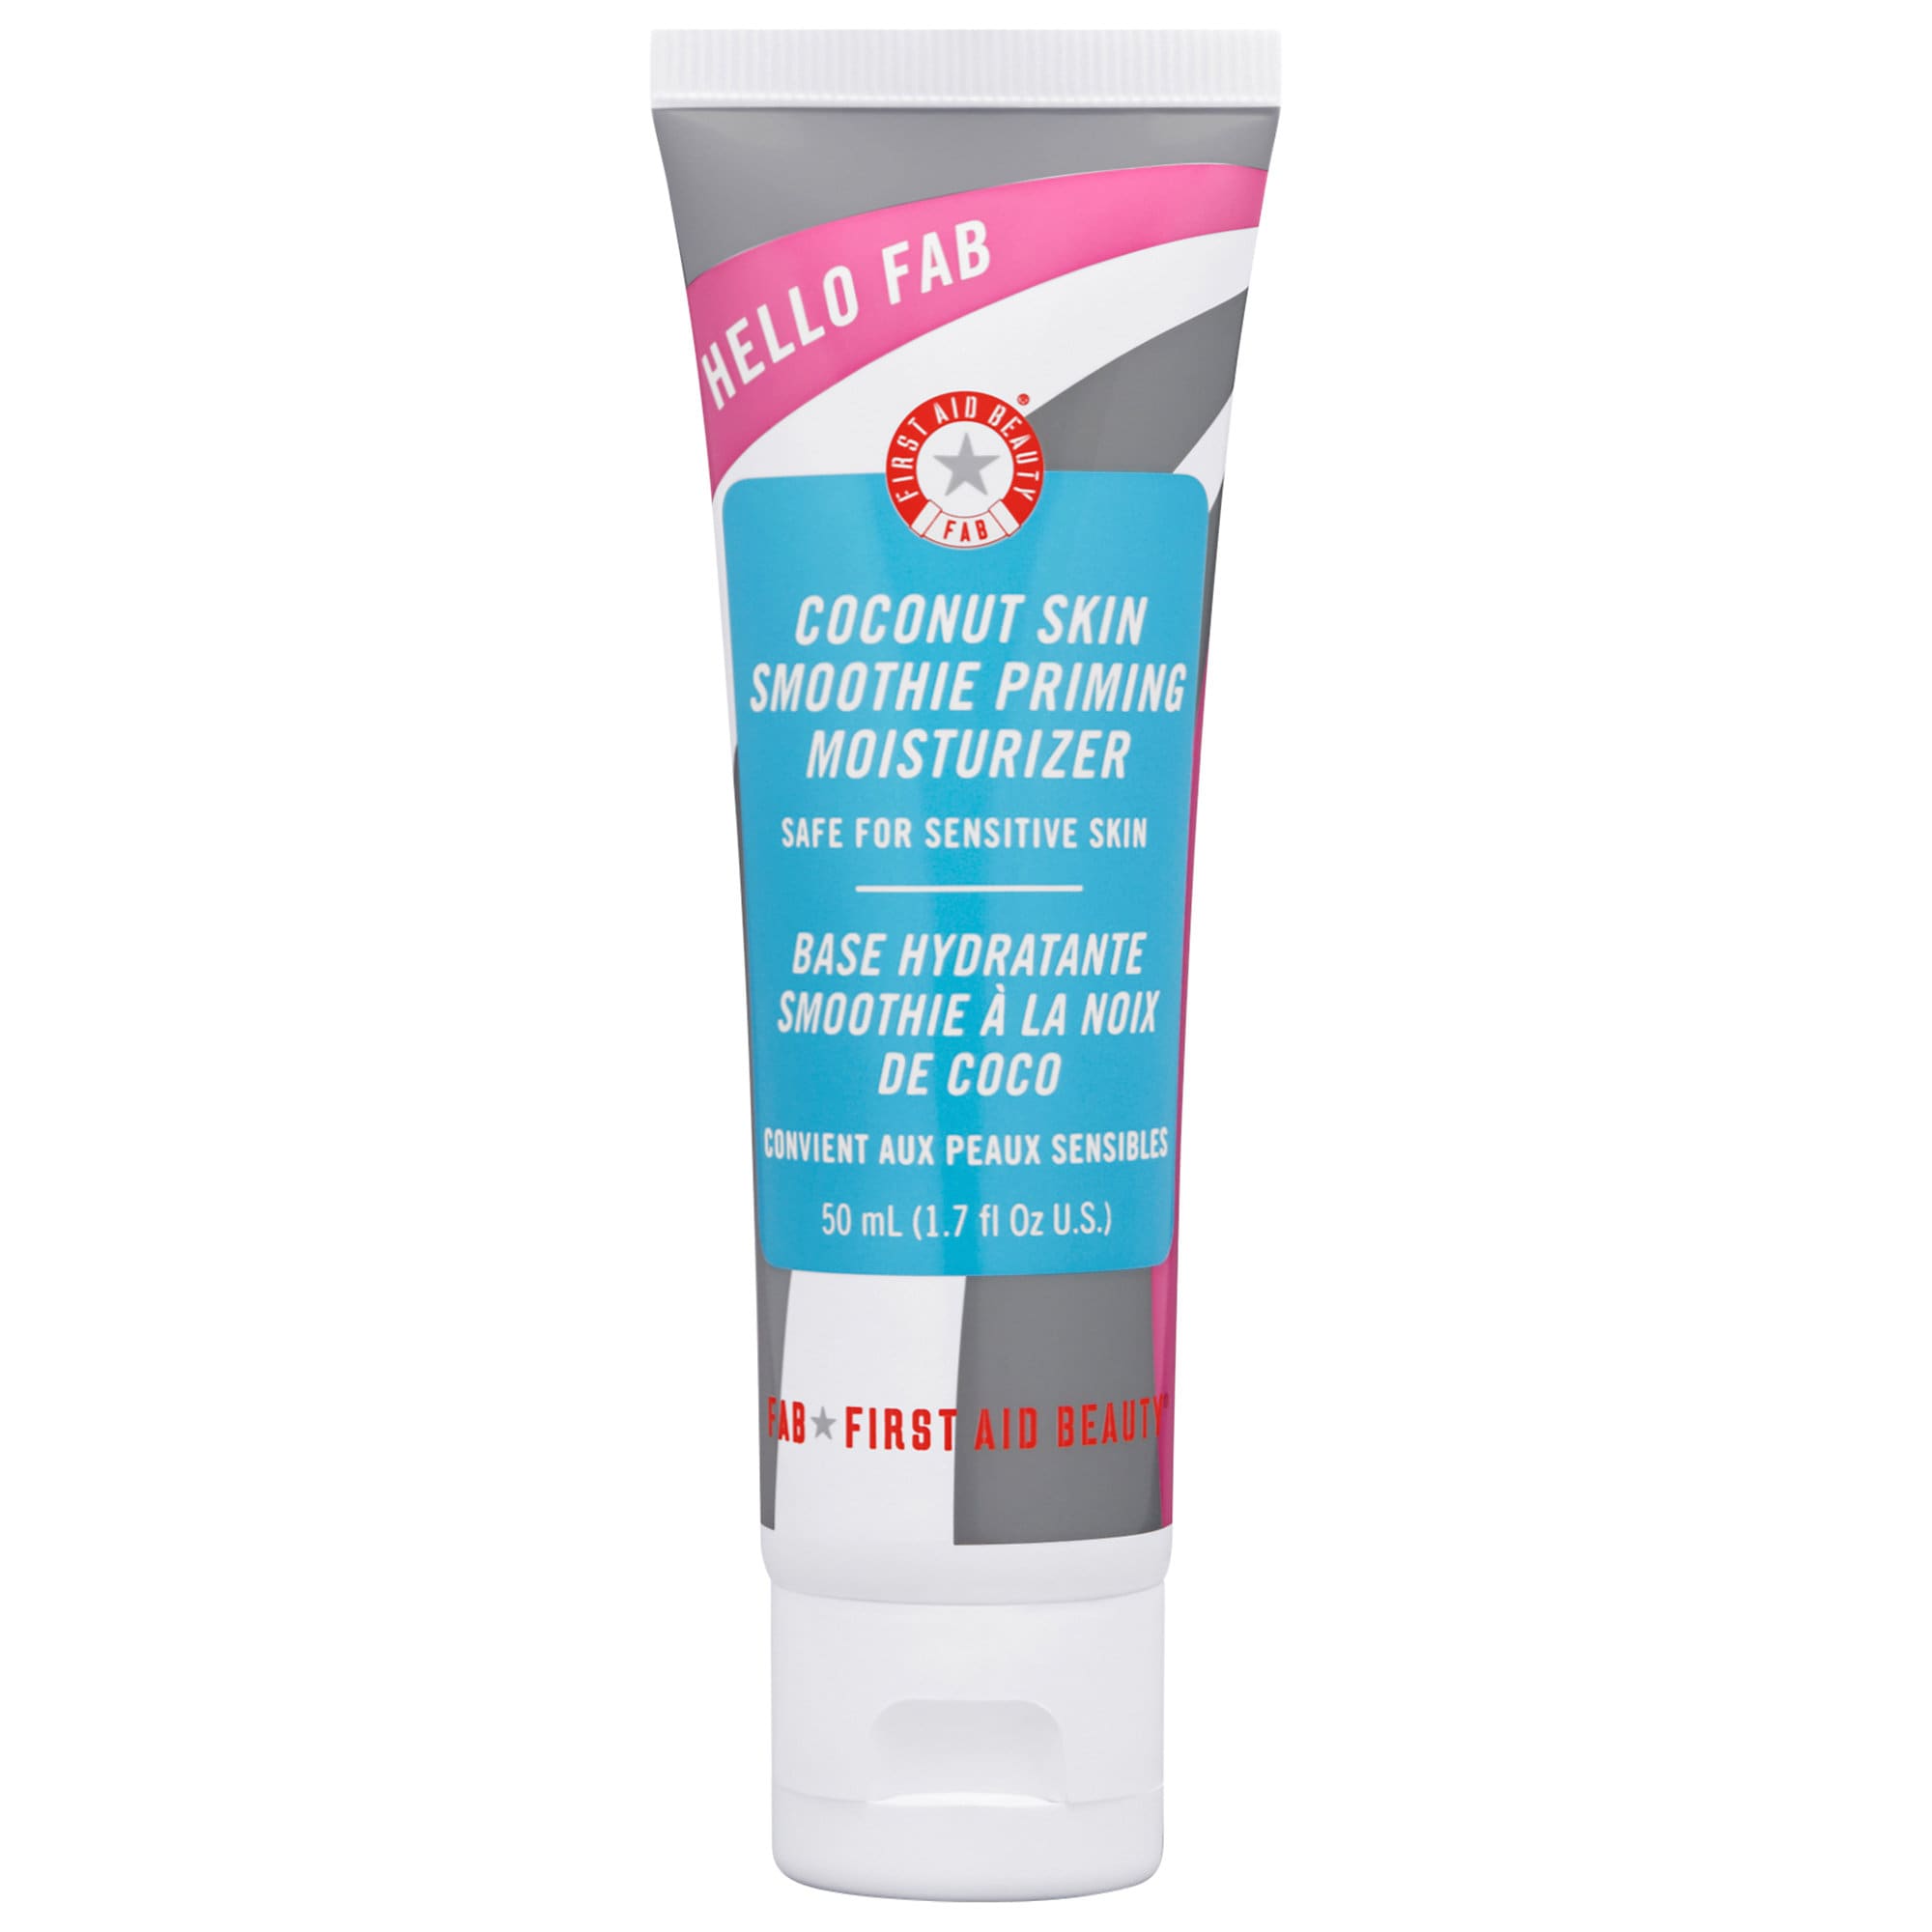 Hello FAB Coconut Skin Smoothie Priming Moisturizer First Aid Beauty